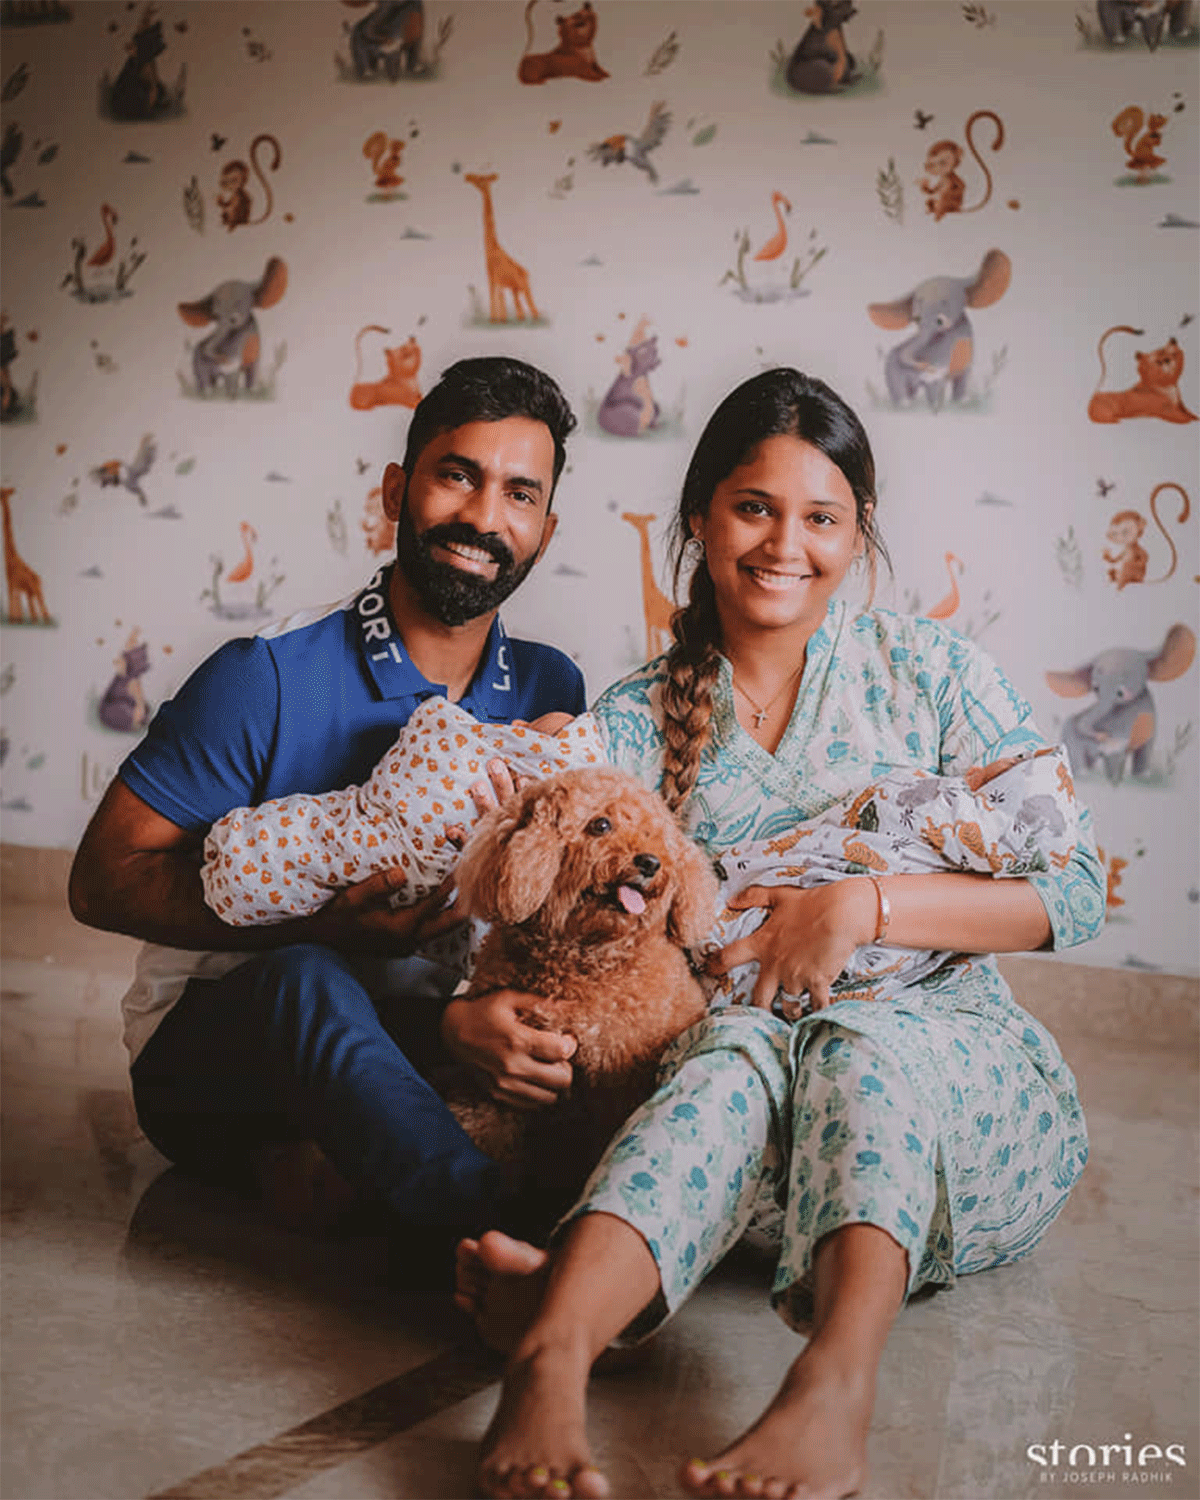 Dinesh Karthik and Dipika Pallikal with their twin sons and their pet dog